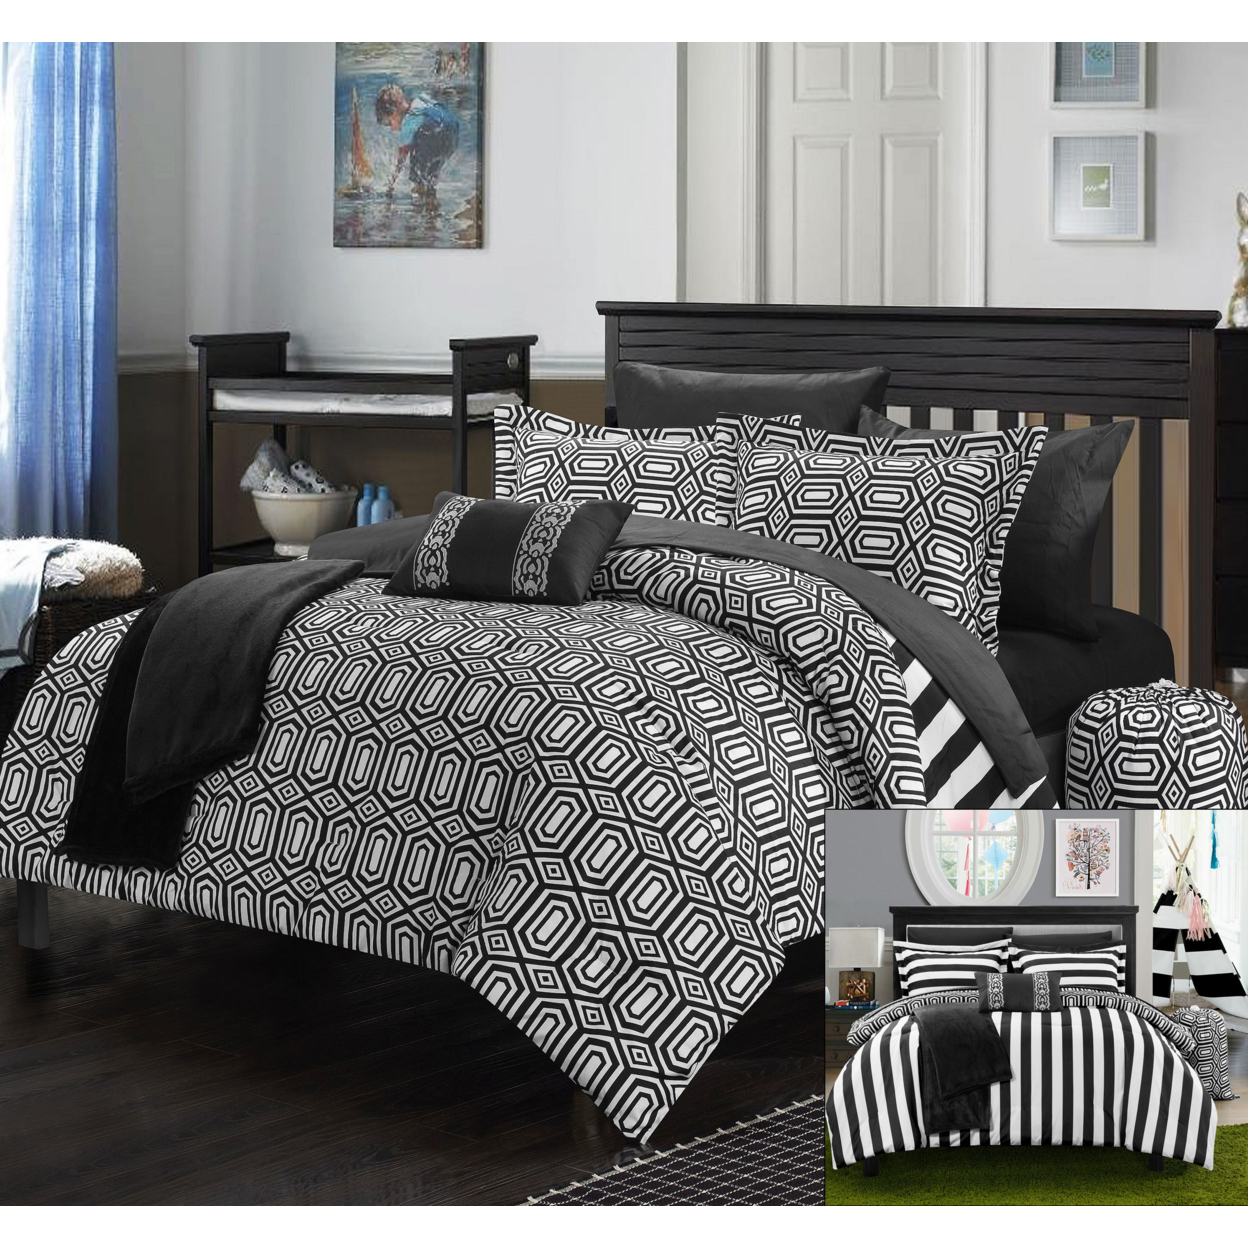 Chic Home 8/10 Piece Lyon Geometric And Striped Printed REVERSIBLE Comforter Set, Includes Sheets, Duffle Hamper And Fleece Throw - Black, T